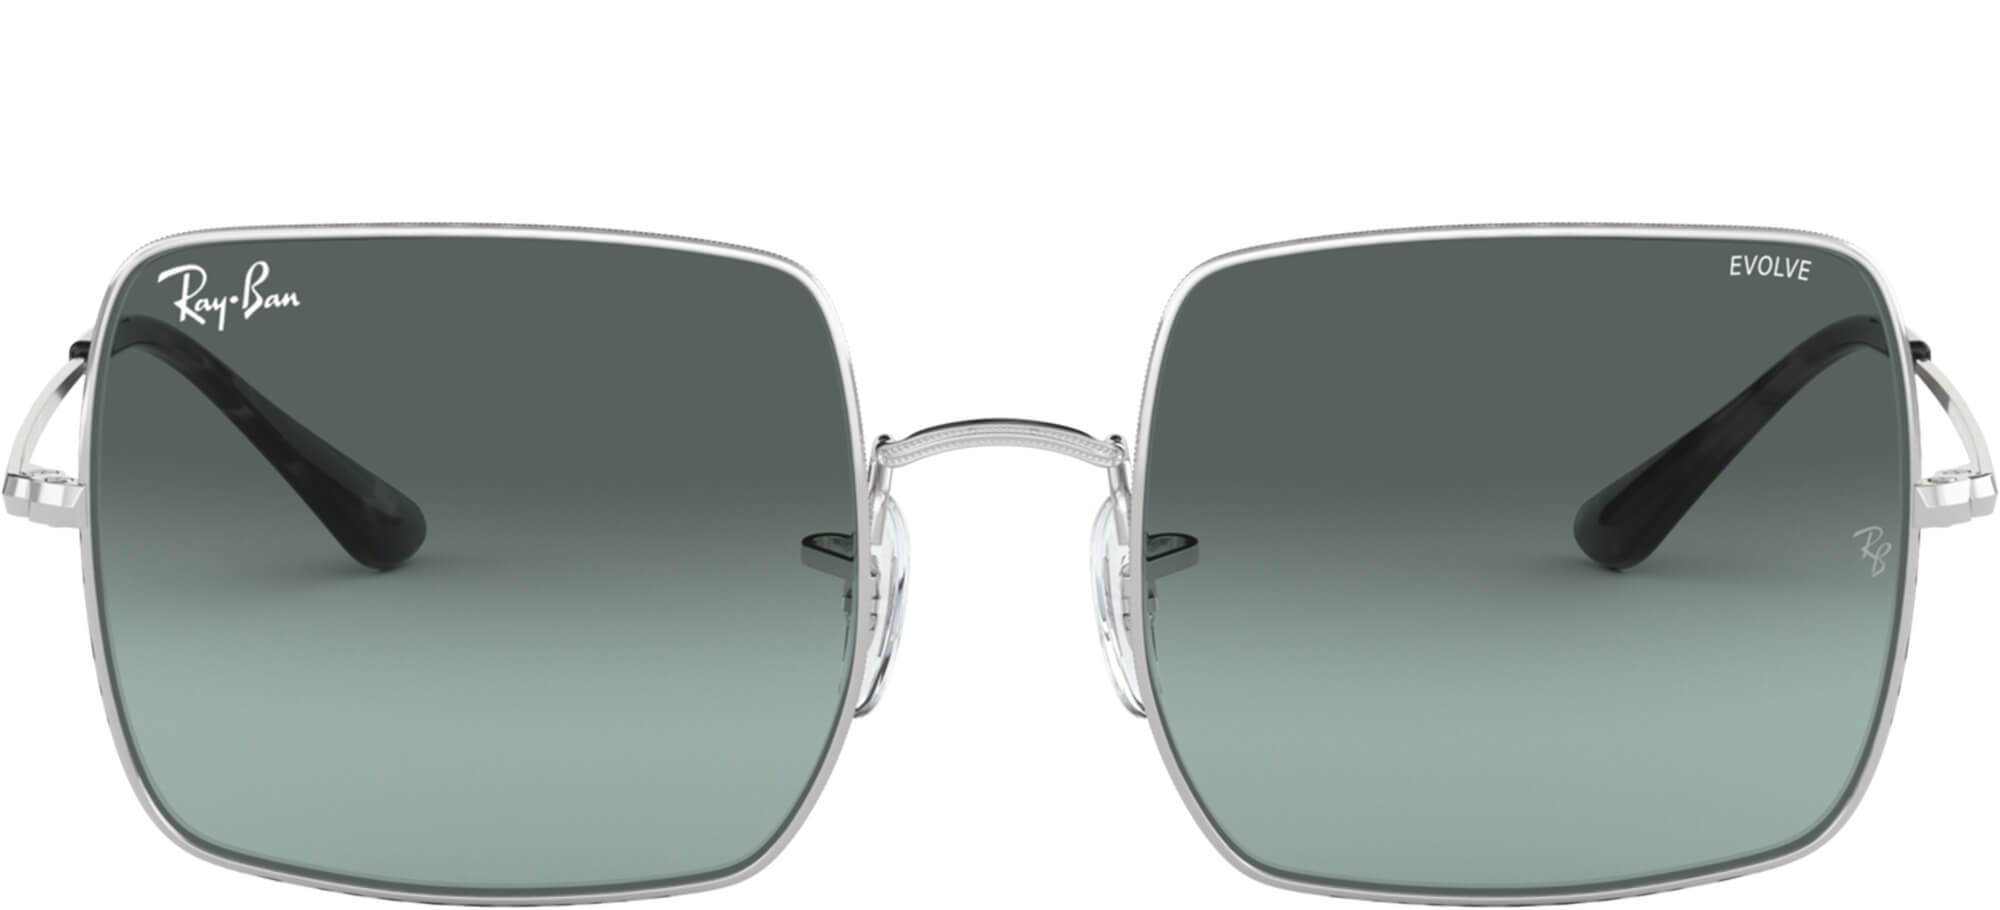 Ray-BanSQUARE RB 1971 EVOLVE LENSESSilver/grey Blue Shaded (9149/AD)